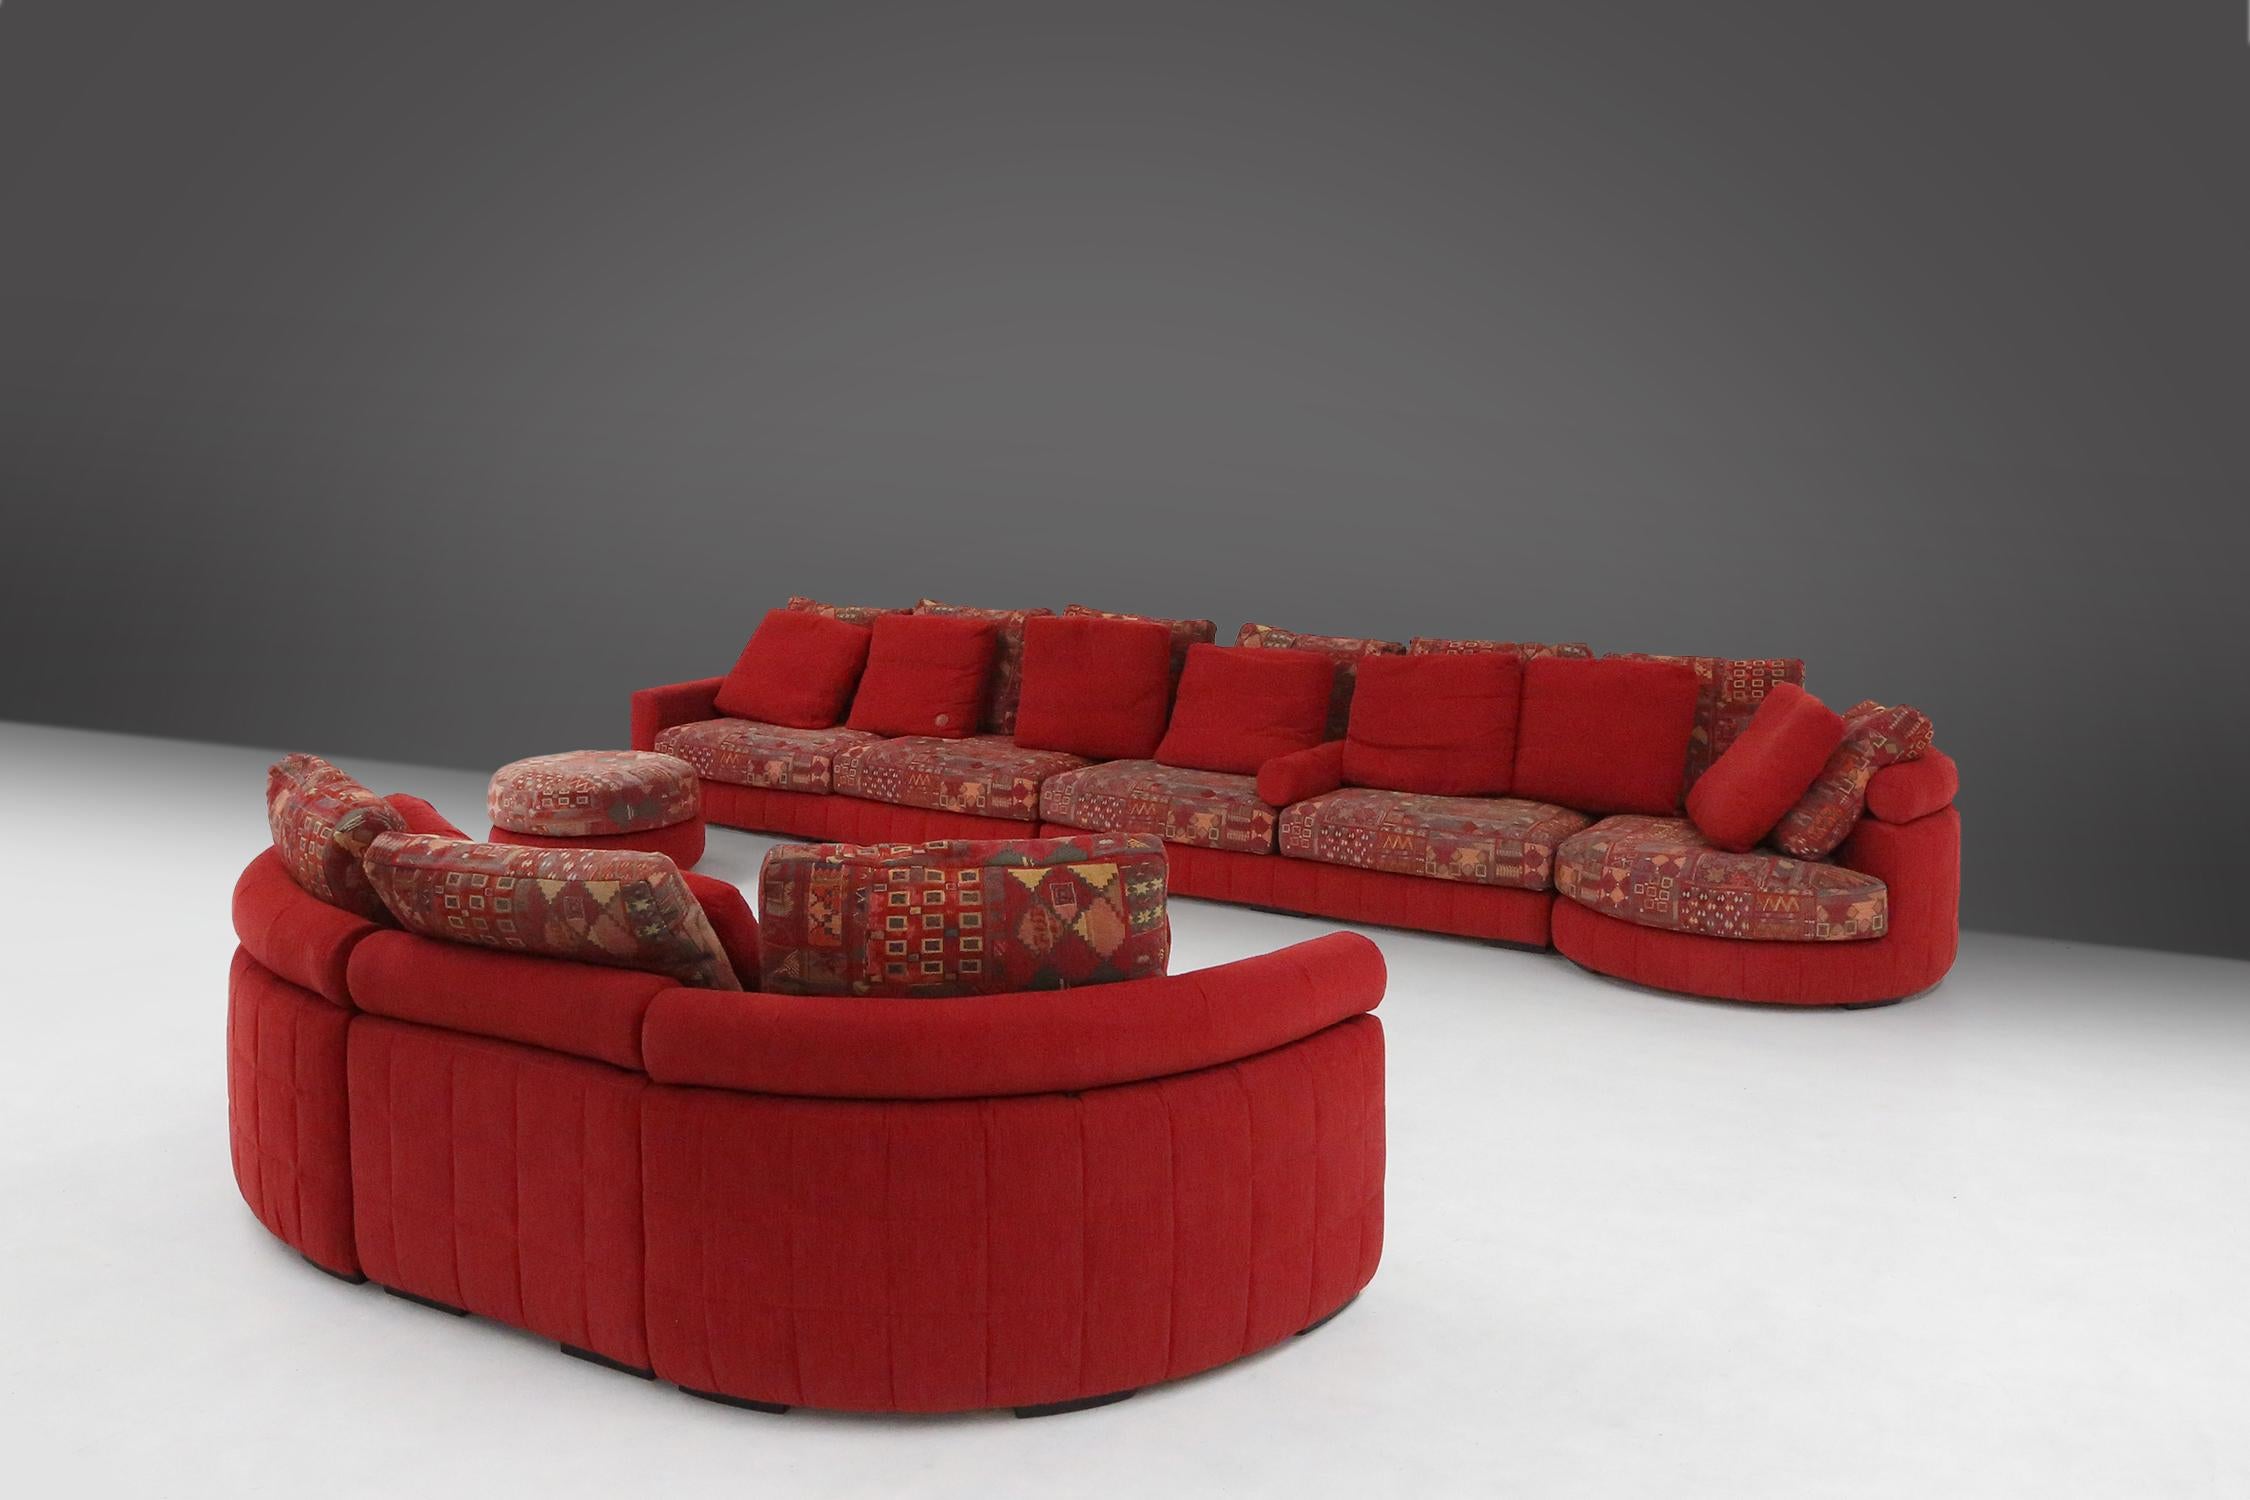 Roche Bobois modular sofa in red and patterned upholstery 1980 For Sale 2